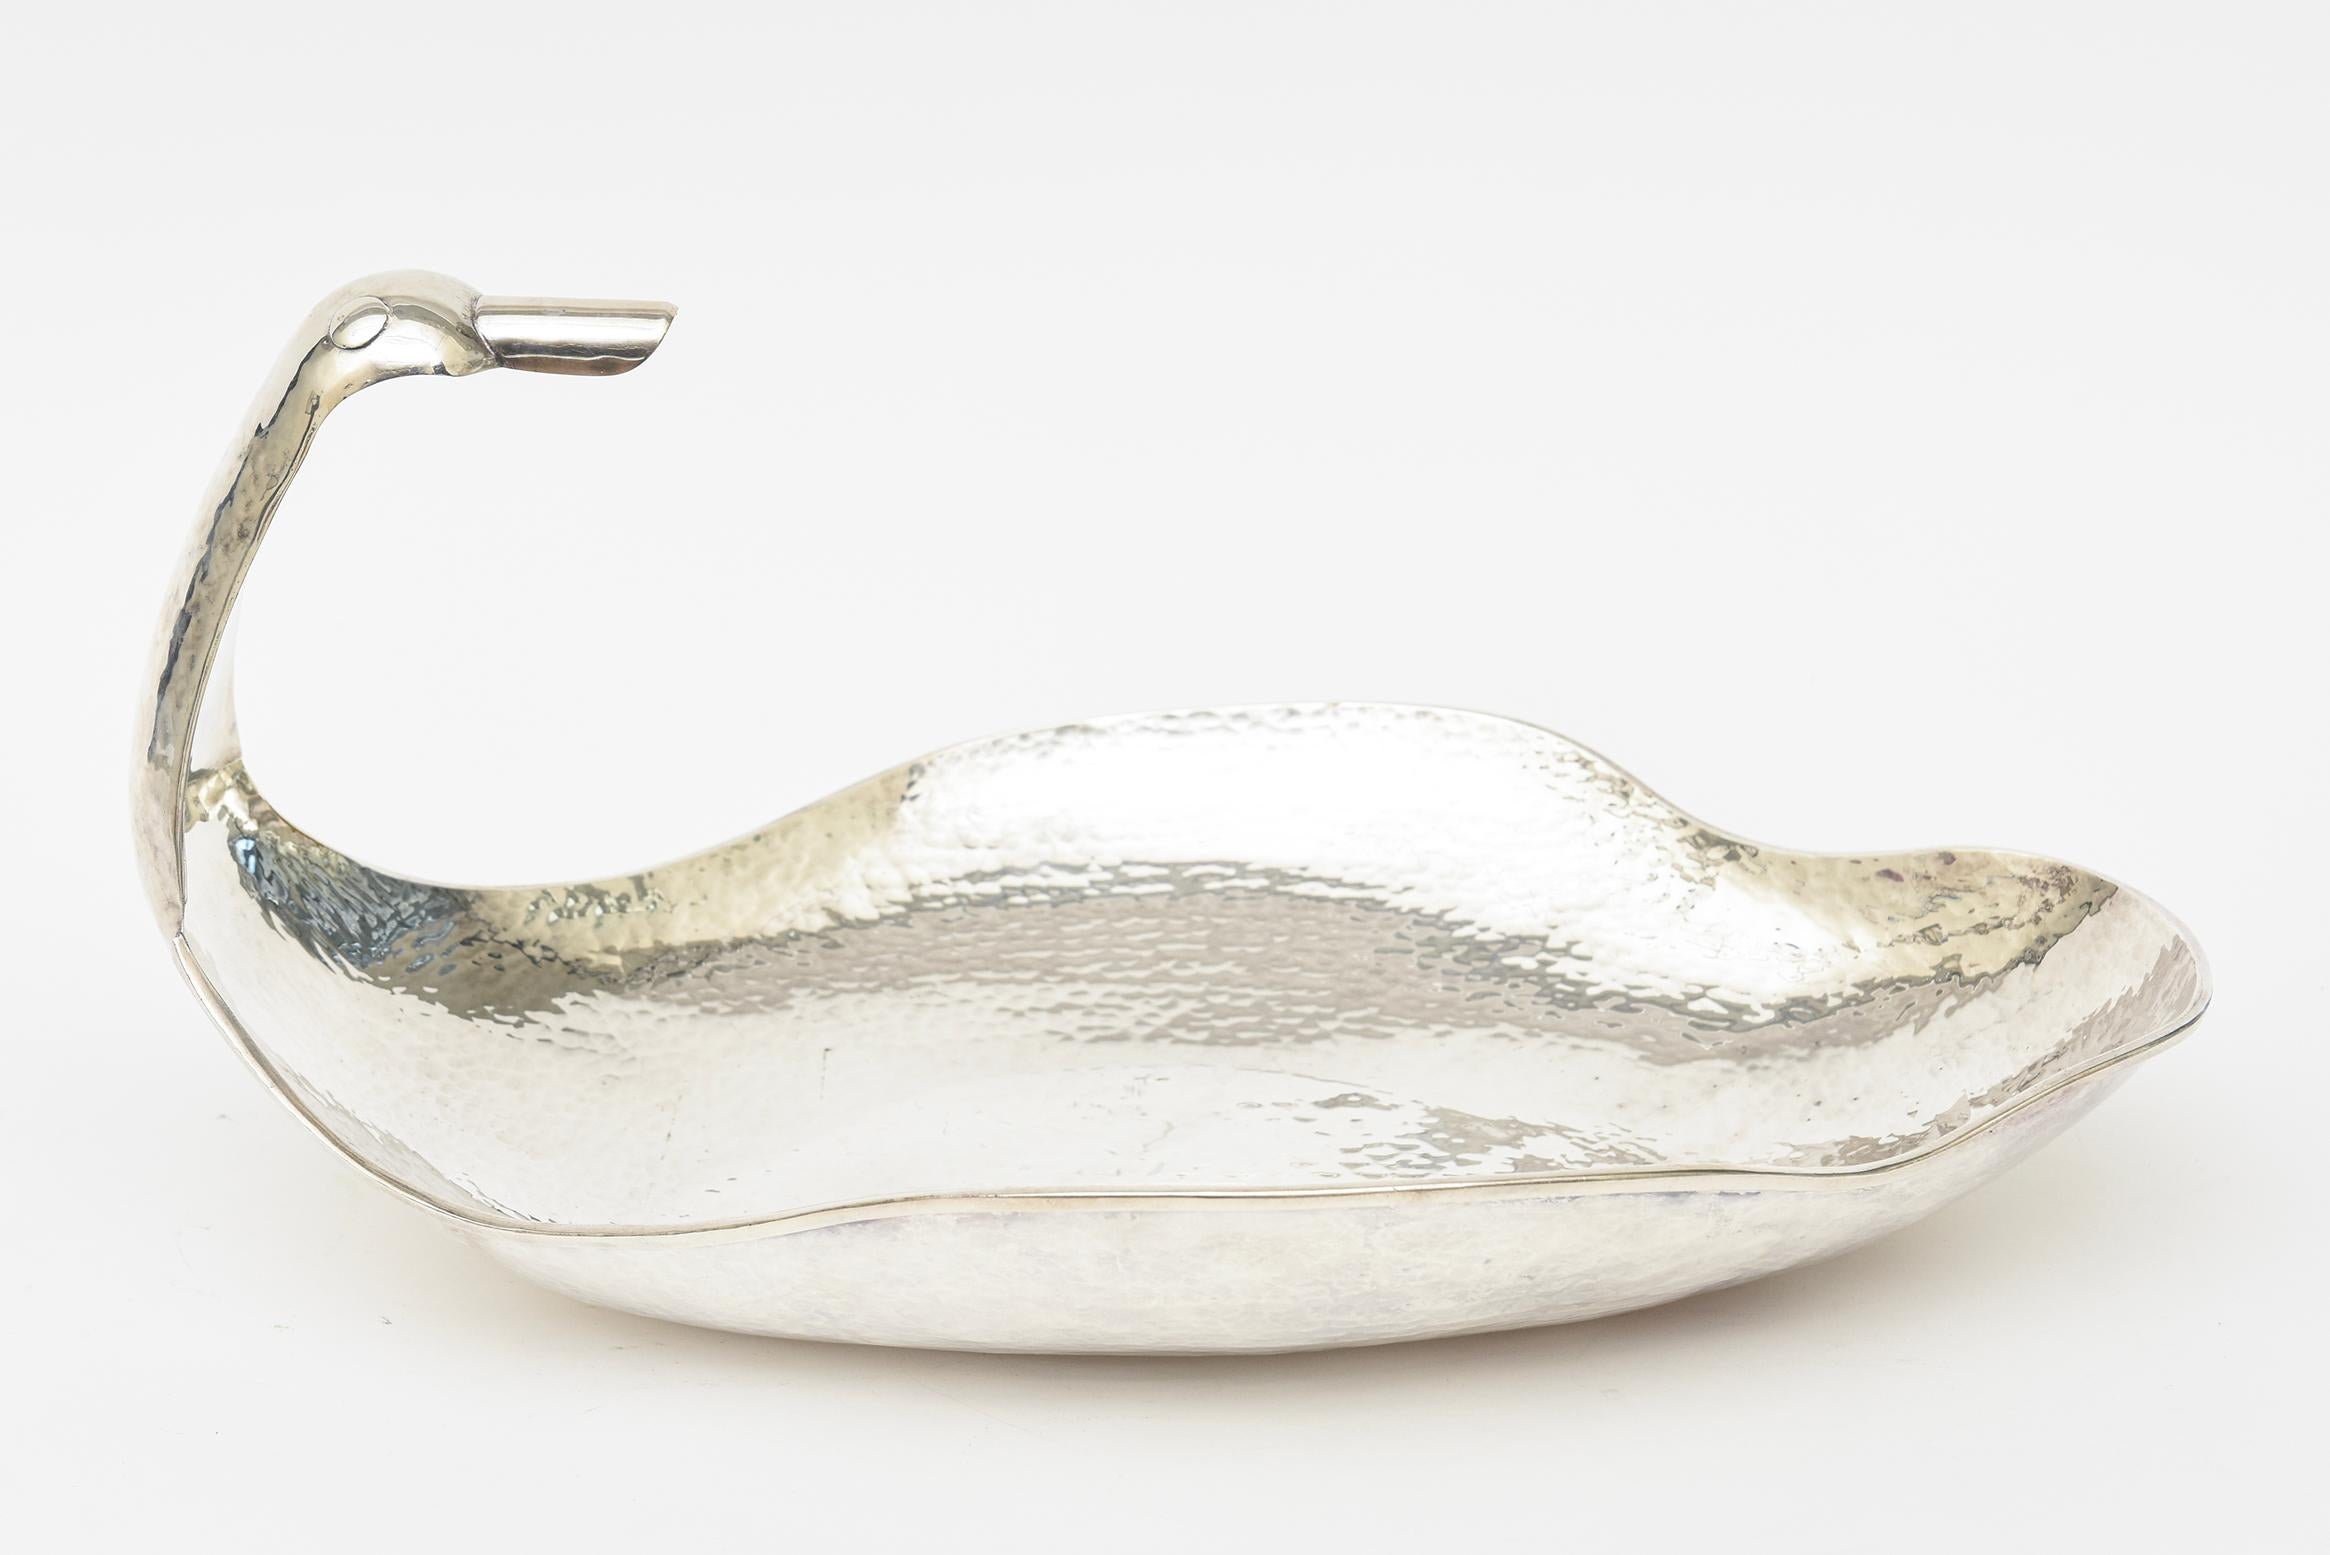 This monumental whimsical vintage hand-hammered silver plate bowl, serving piece or barware has an exaggerated duck head with large beak as one of the curved sides. It has scalloped sides. It was professionally polished to the best it can be. No